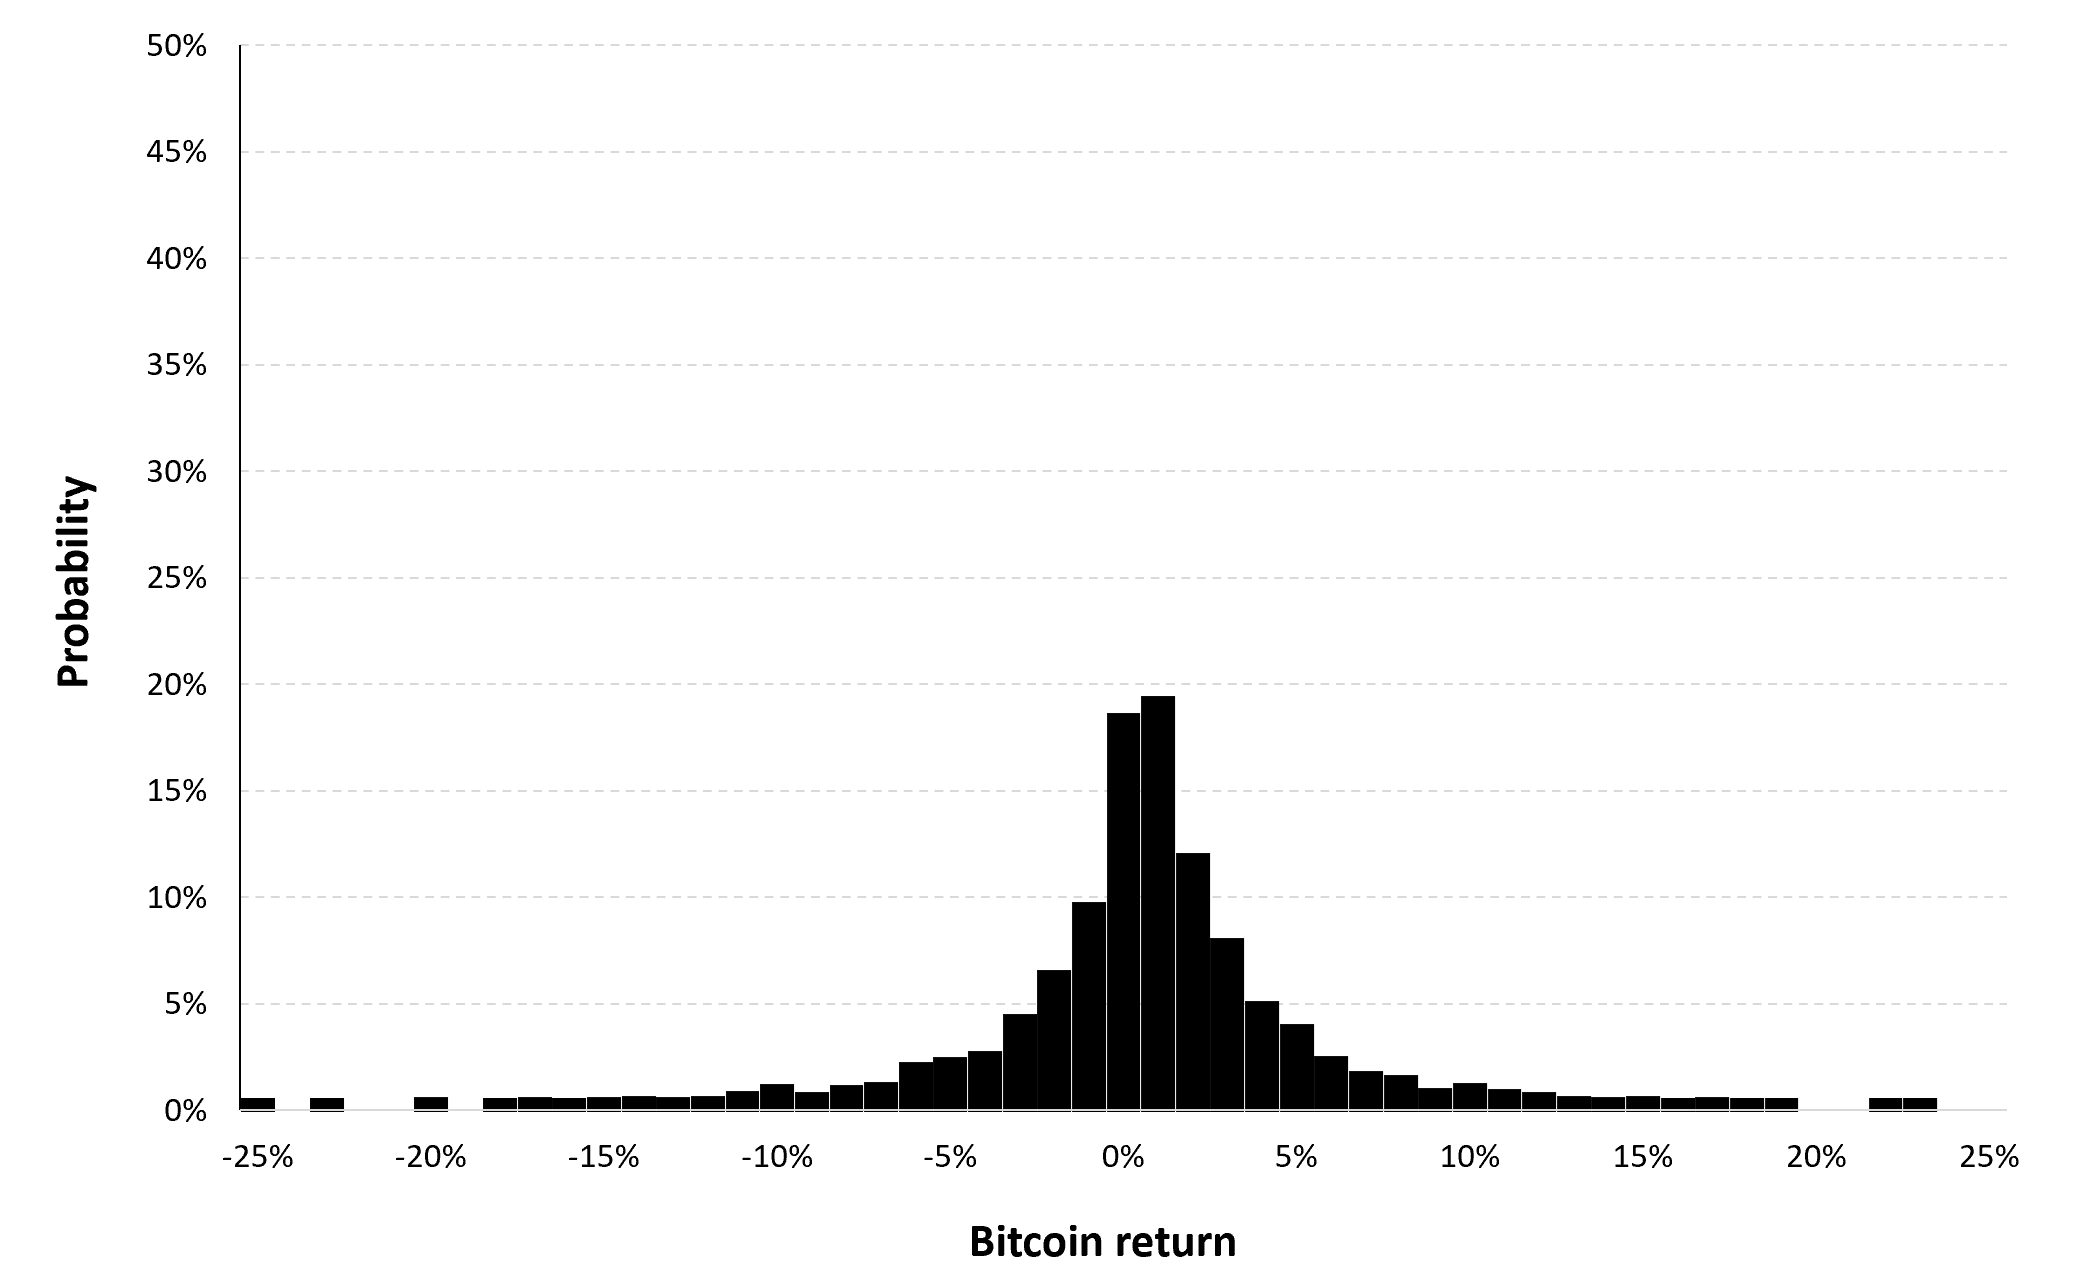 Historical distribution of the daily Bitcoin returns